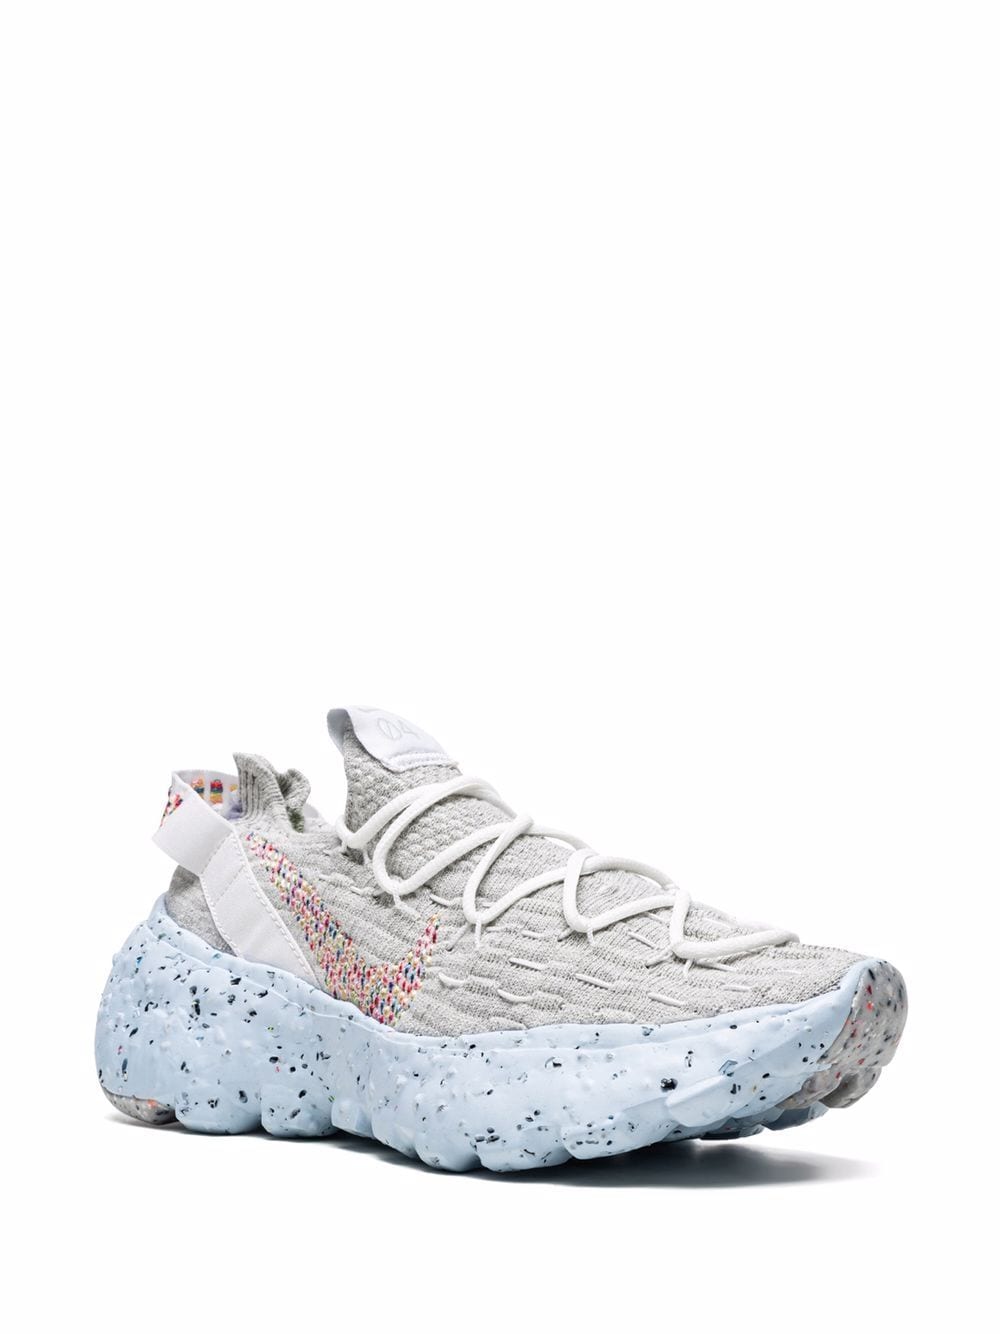 Image 2 of Nike Space Hippie 04 "Summit White/Photon Dust-Conco" sneakers